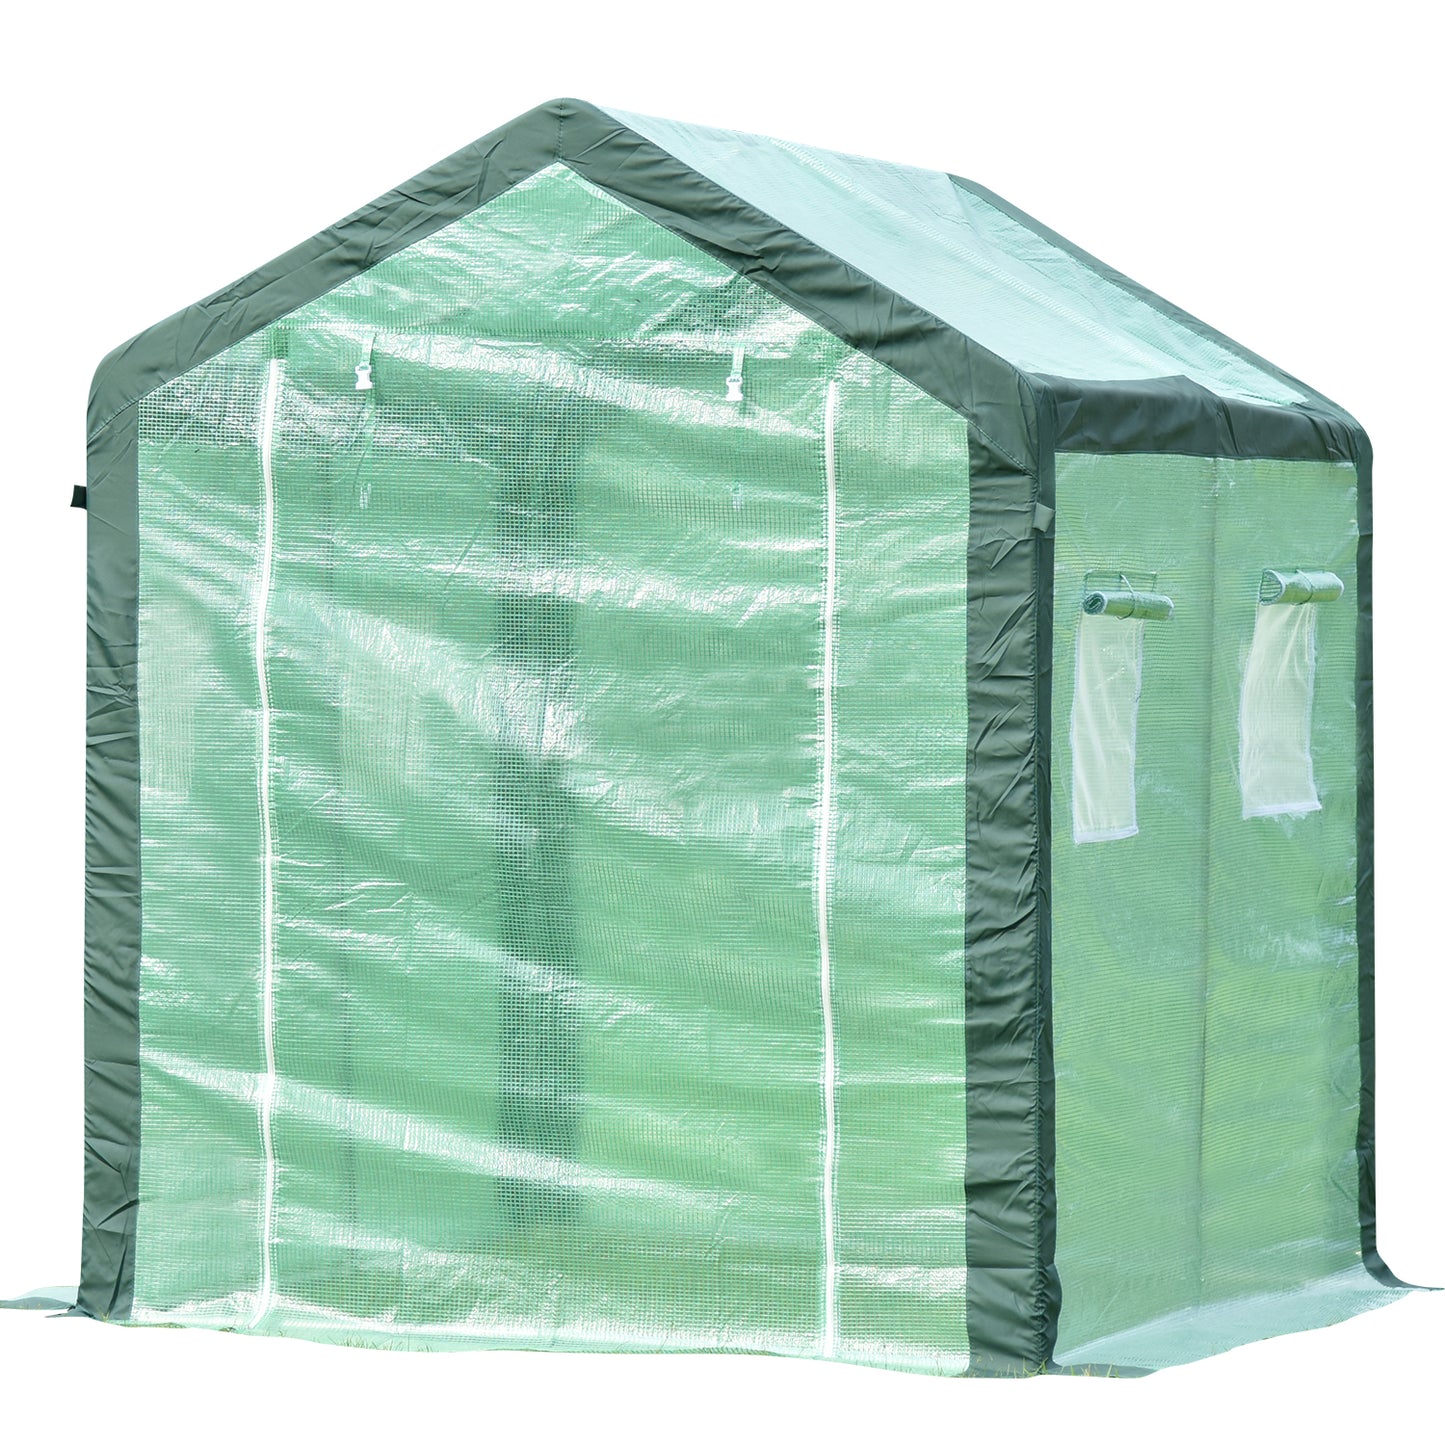 Greenhouse, 8.2' X 5.9' X 5.7' Portable Green Houses Tunnel Tent, Large Walk-in Heavy Duty Green House with 2 Zipper Entry Doors and 4 Roll-Up Windows for Patio Backyard Garden, Green, LJ1829